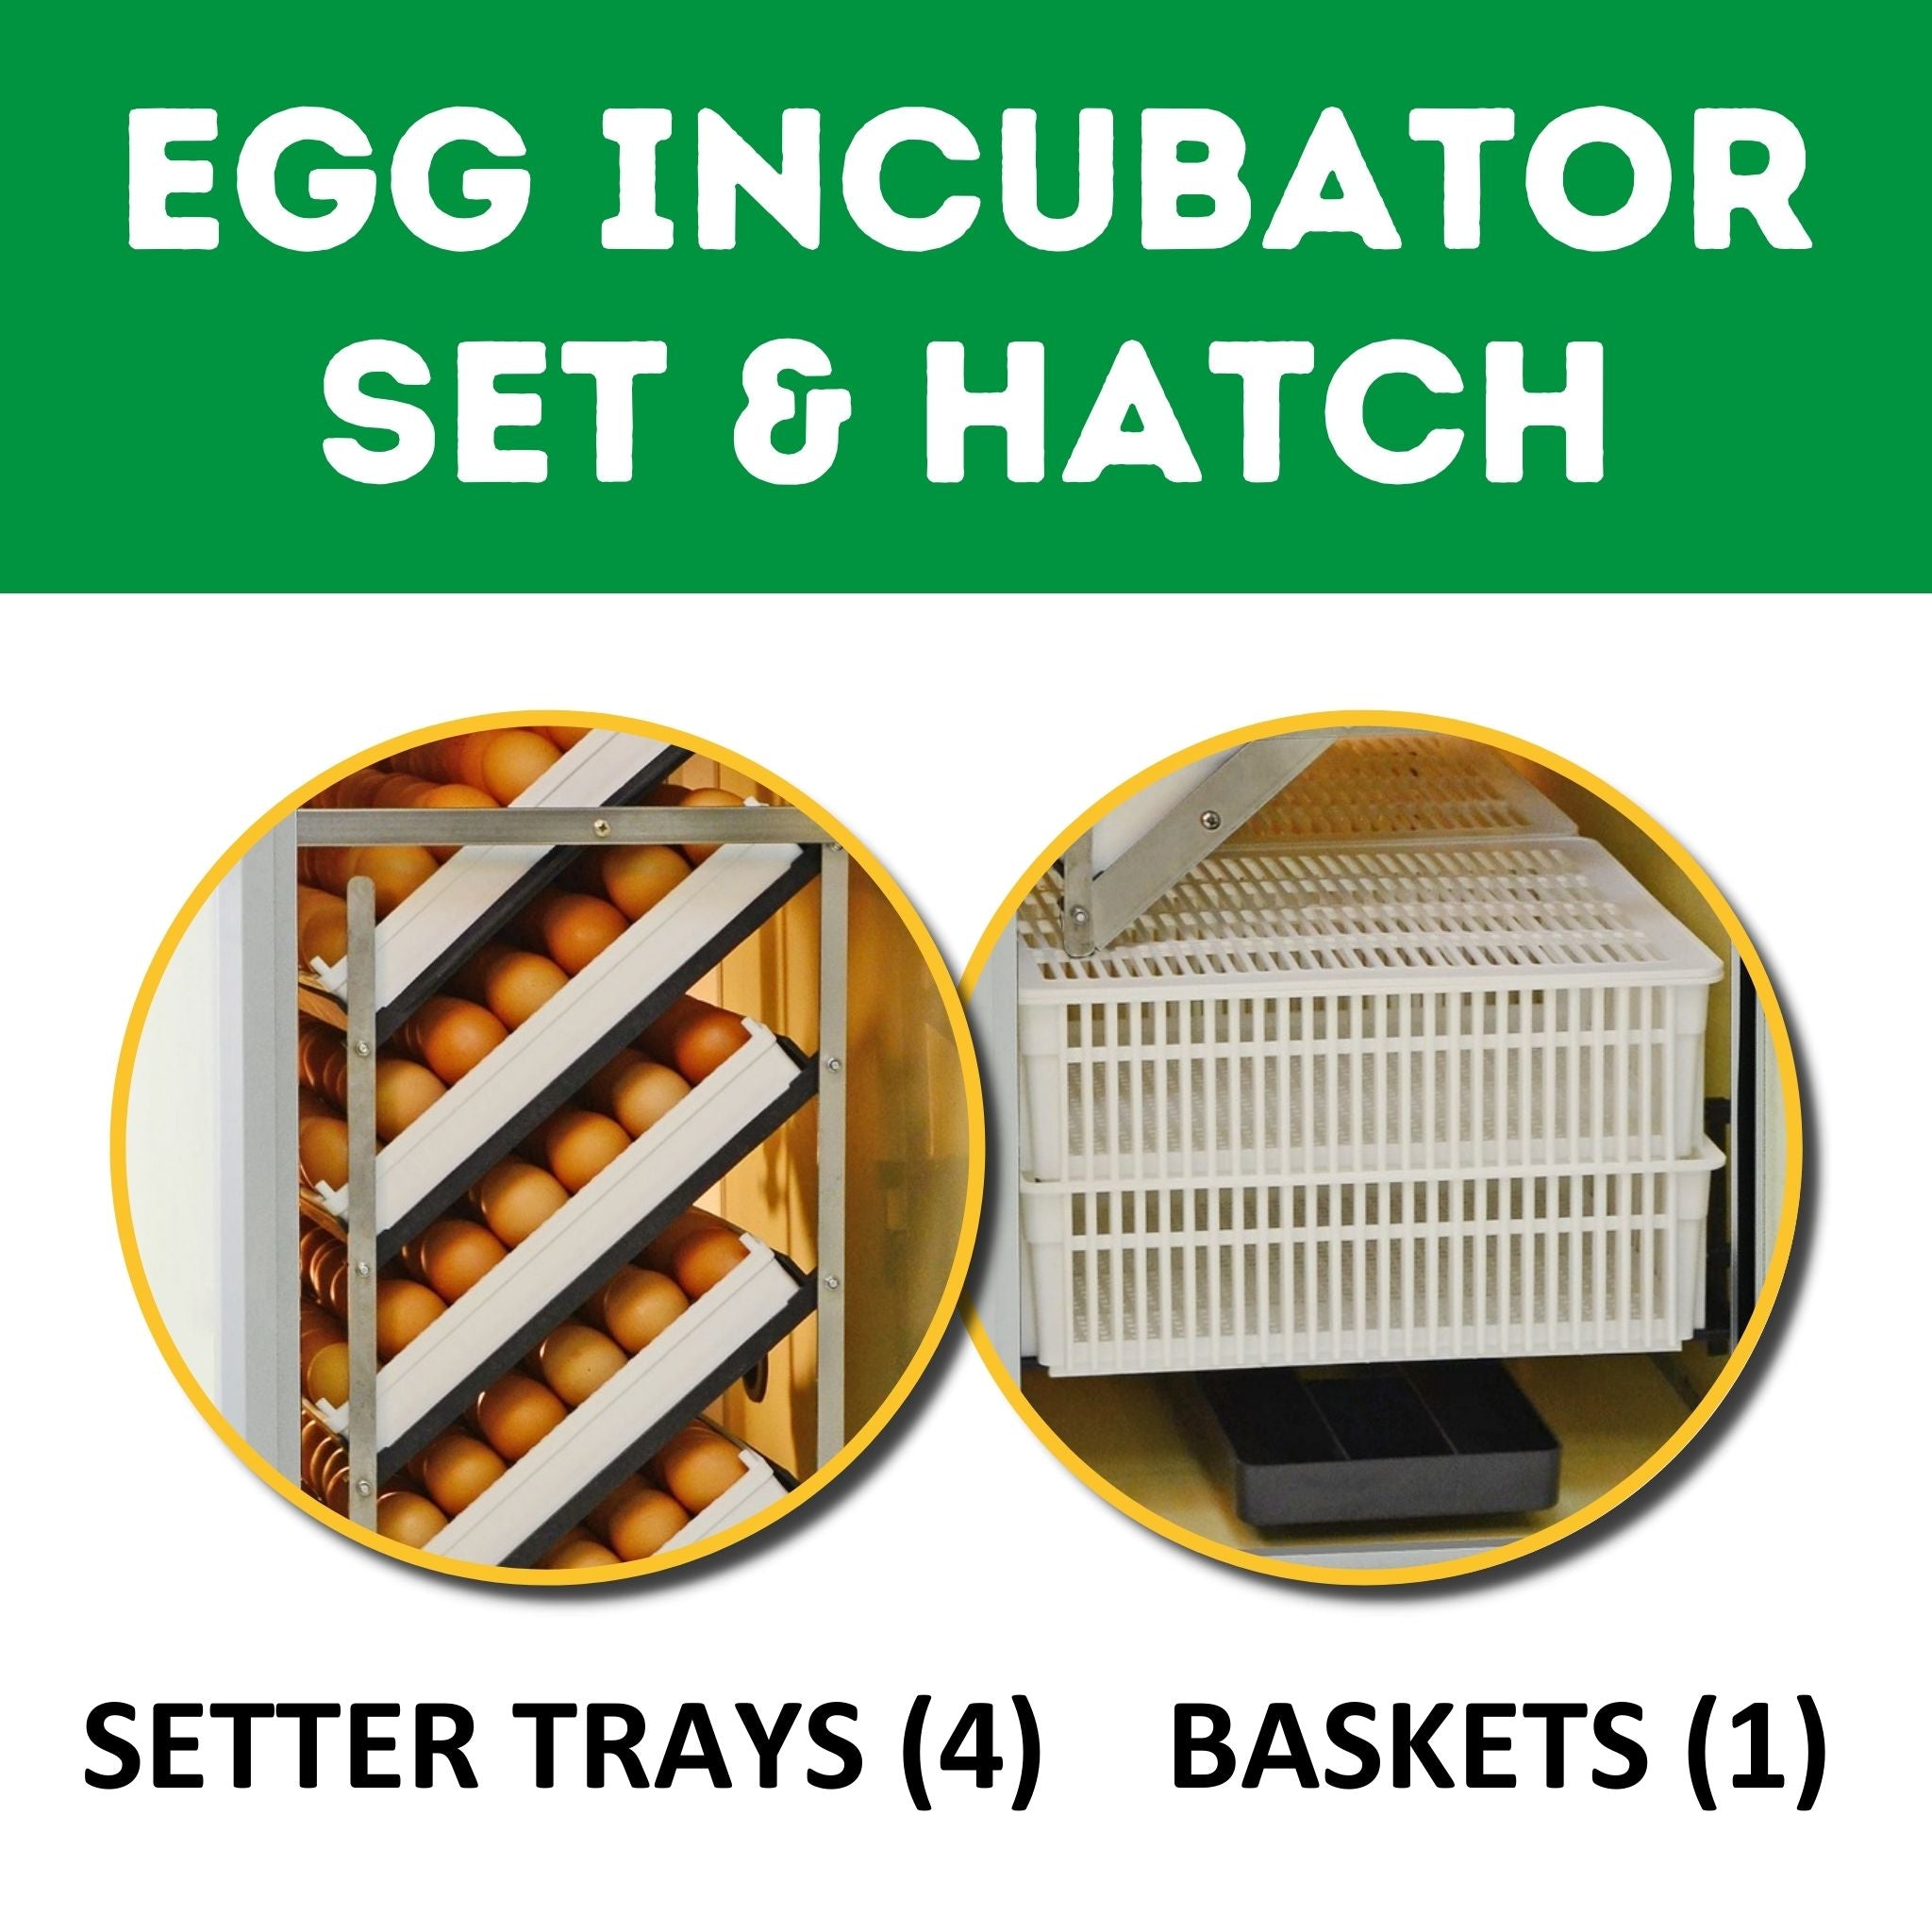 Hatching Time Cimuka. Image shows that incubator is setter and hatcher combo. Includes 4 setter trays and 1 hatching basket, both seen in image.